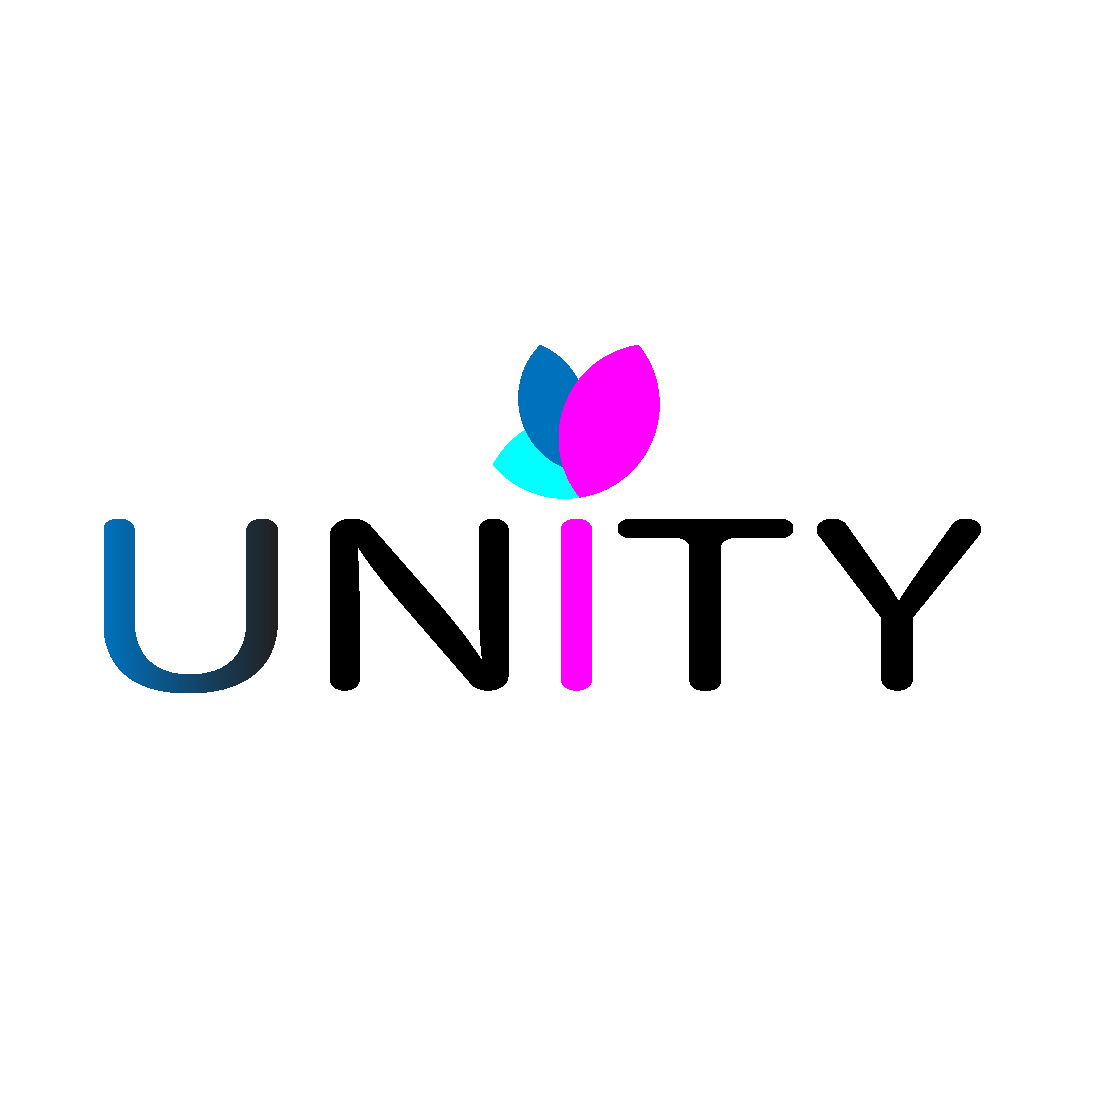 One-Fantastic-Unity Logo with High resolutions-only $5 preview image.